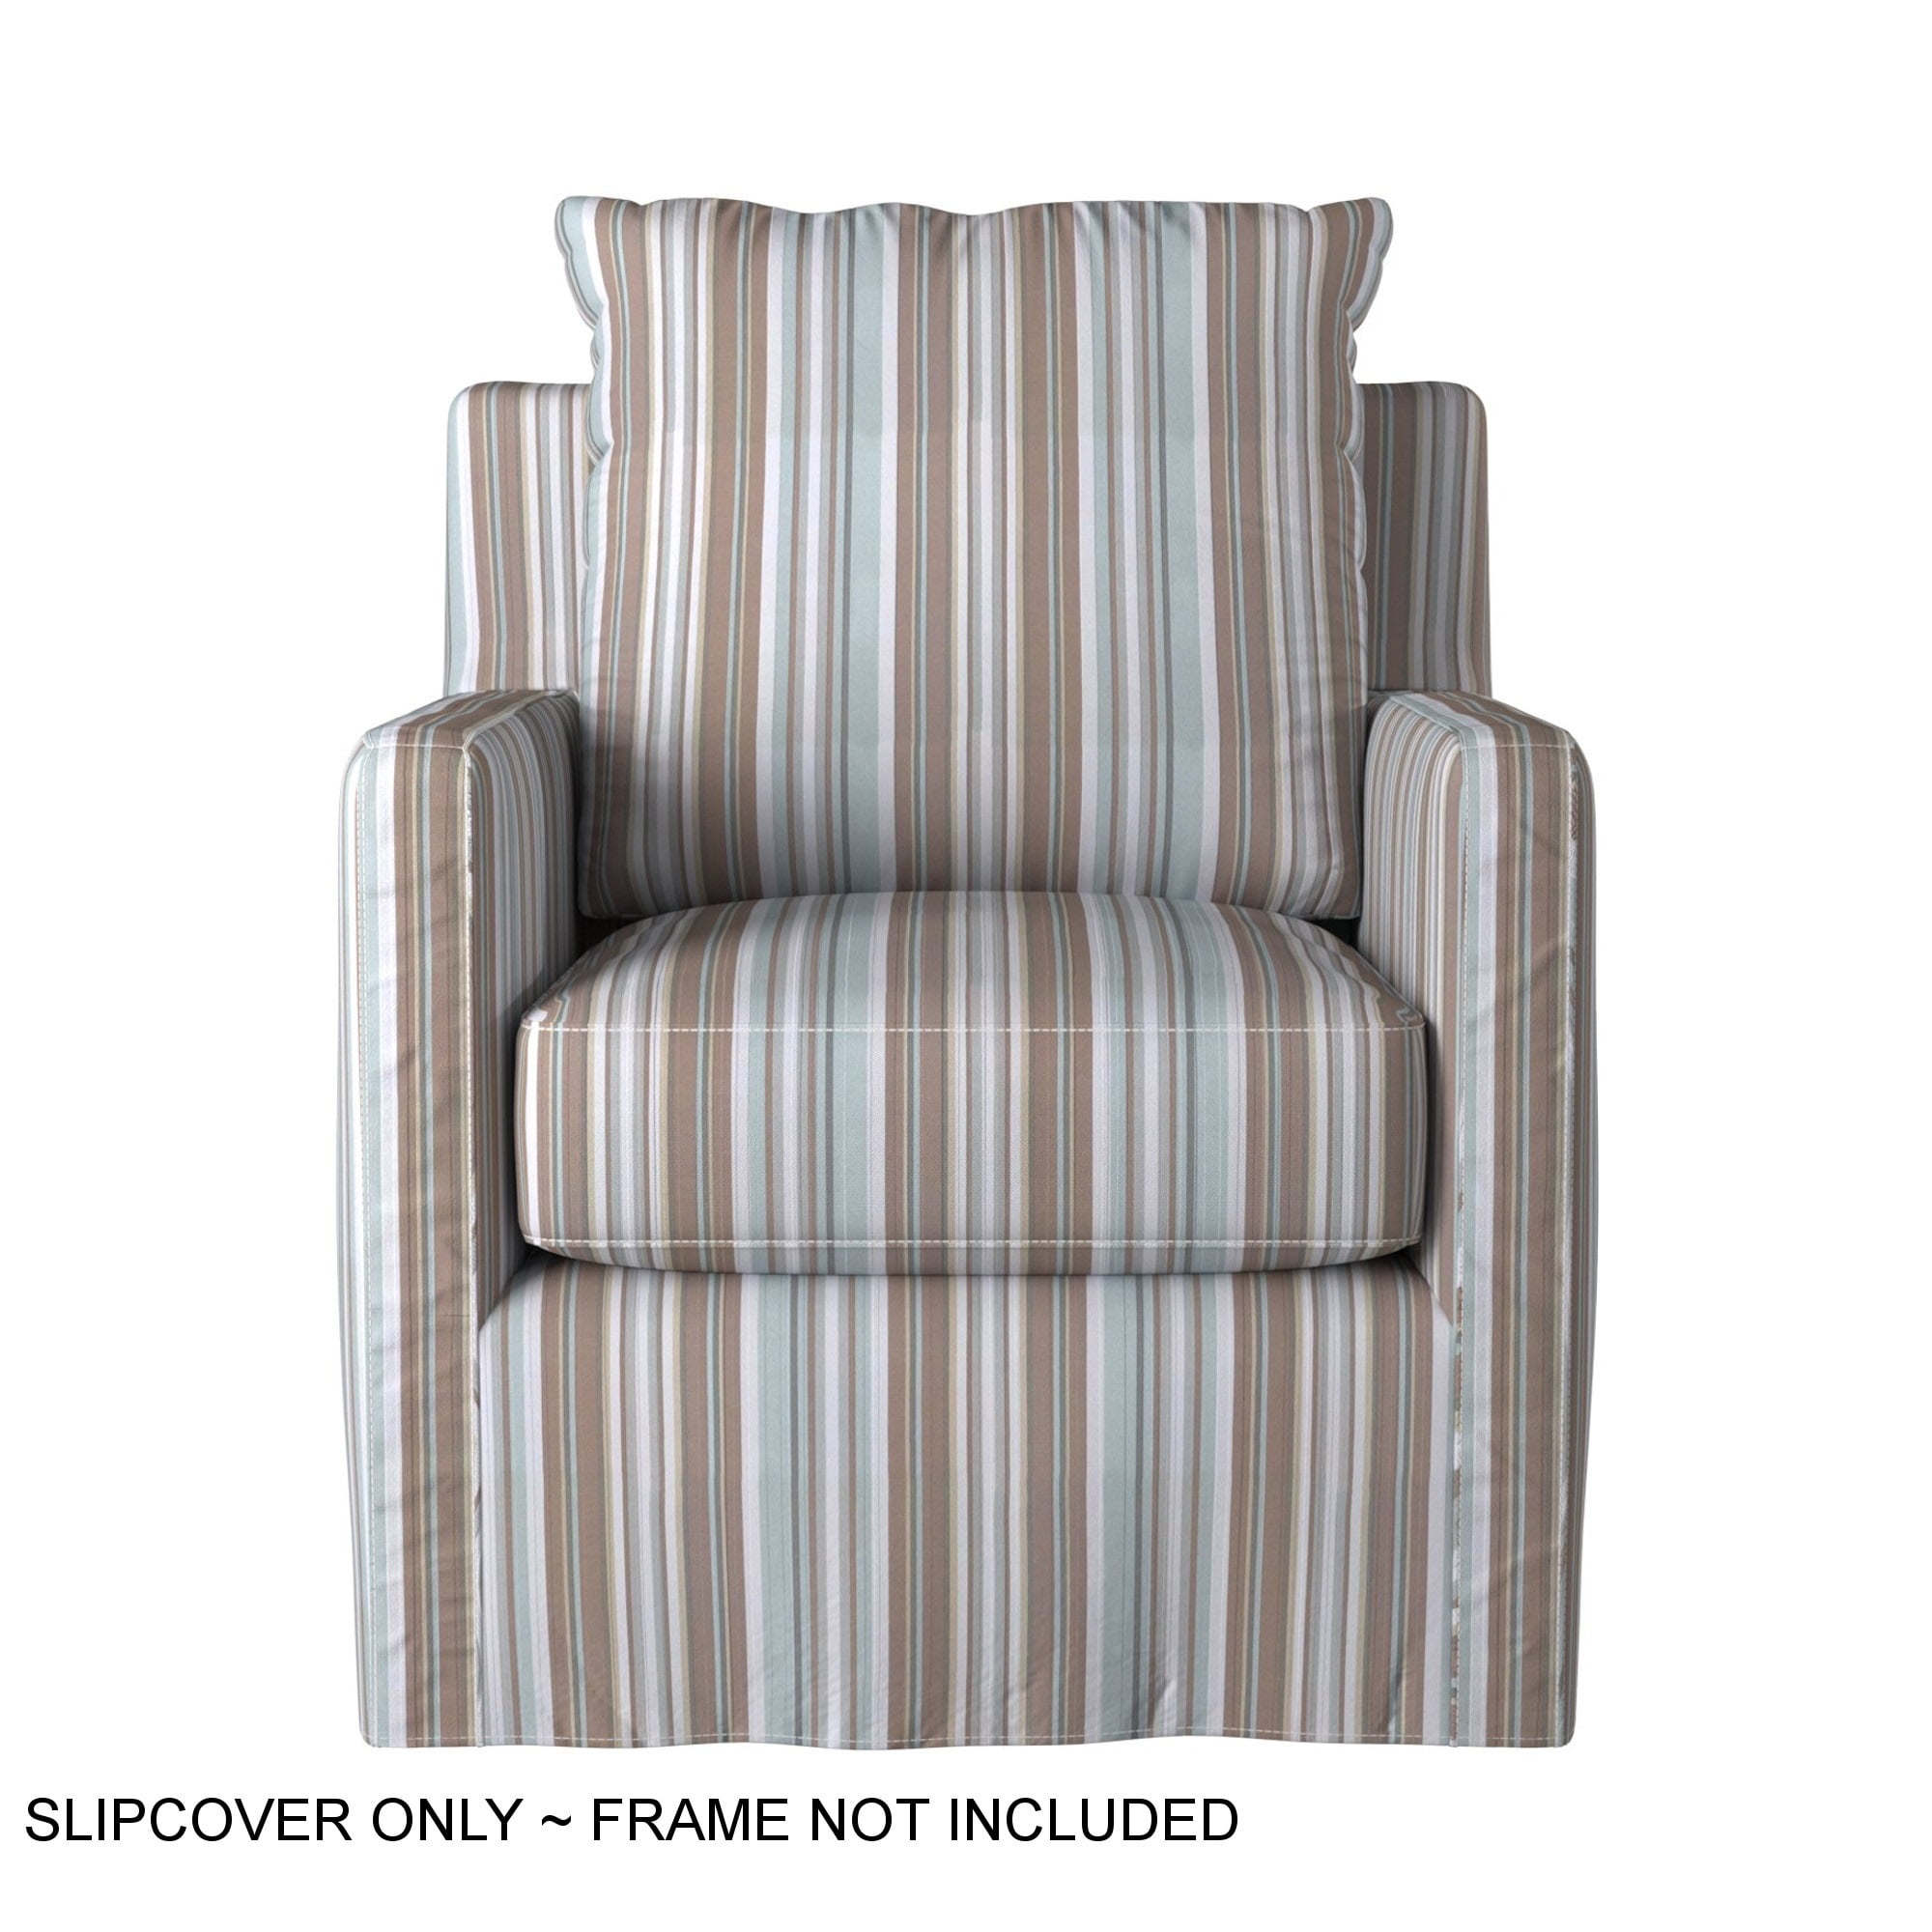 Blue Stripe All Cotton Sofa/Couch/Loveseat/Arm Chair Slipcover 